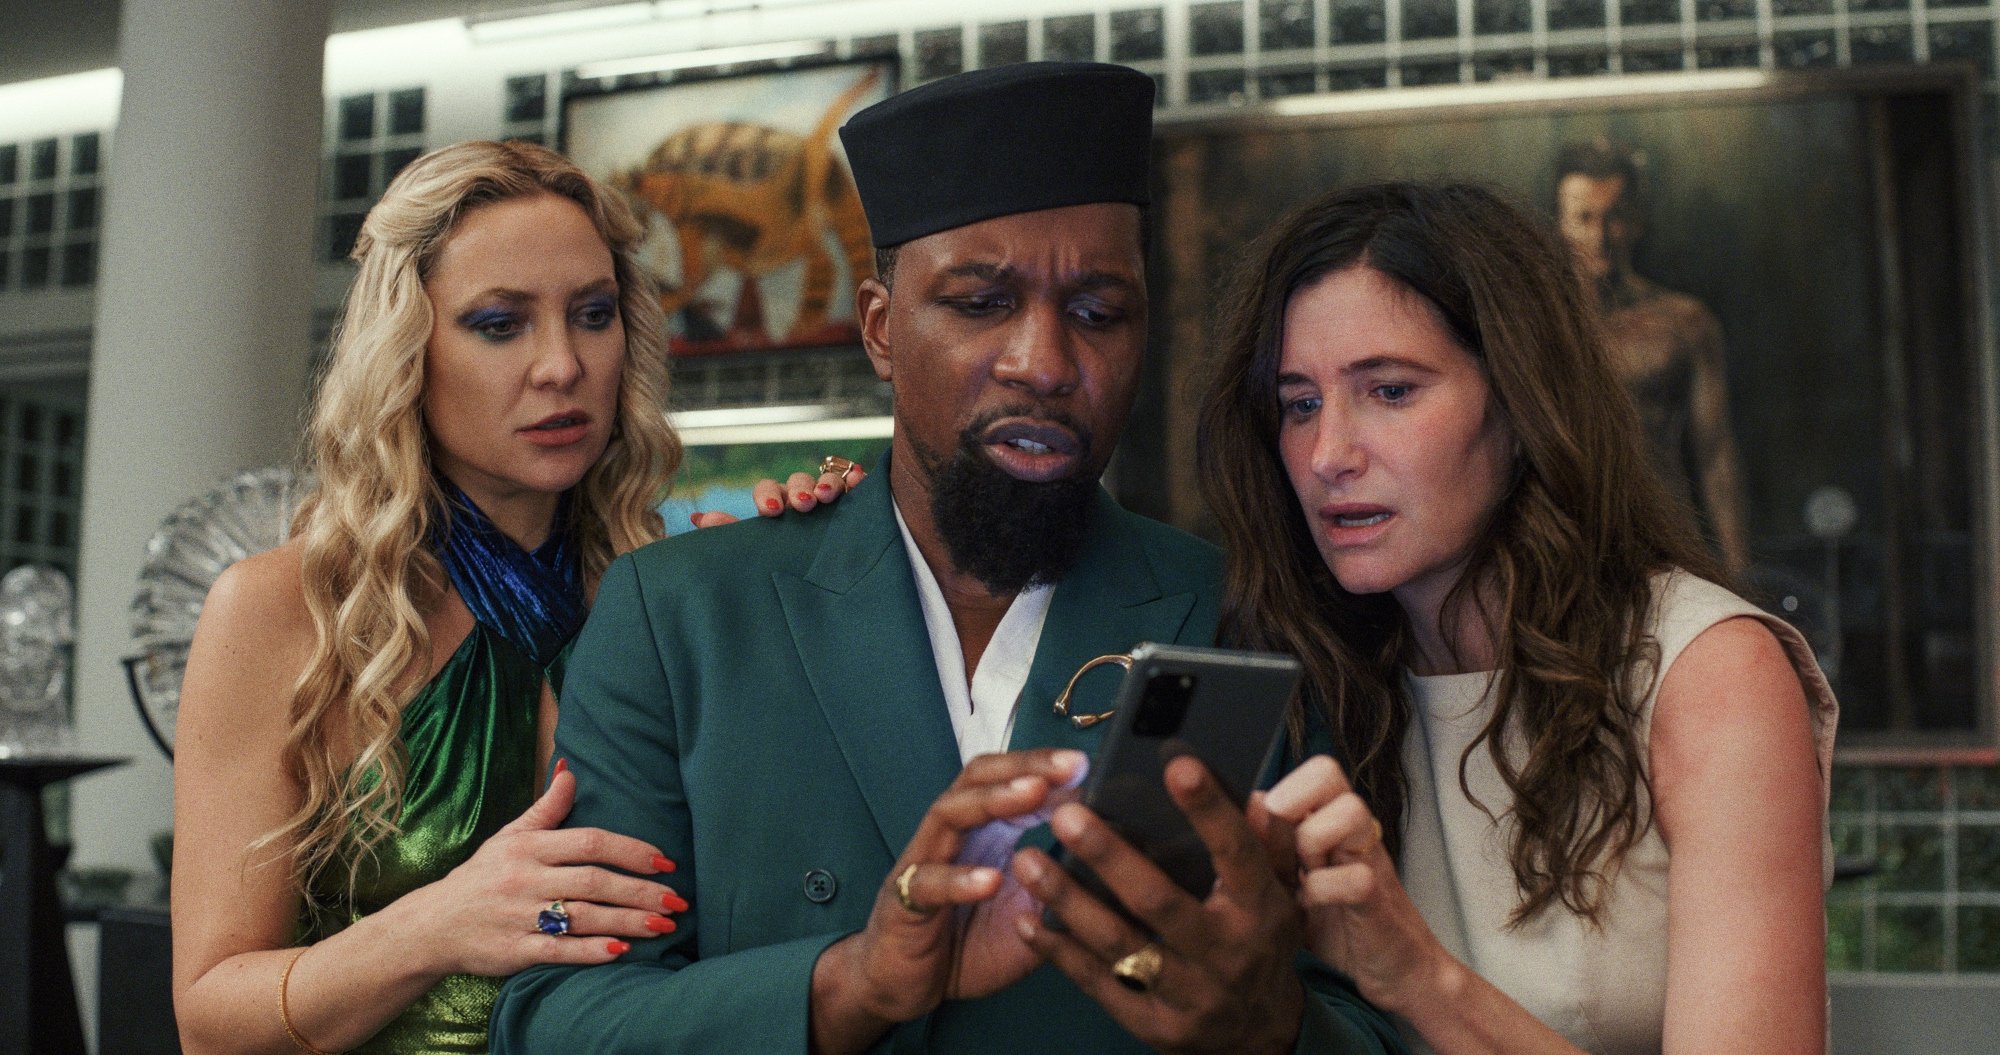 'Glass Onion: A Knives Out Mystery' Kate Hudson as Birdie, Leslie Odom Jr. as Lionel and Kathryn Hahn as Claire looking at the cell phone Lionel is holding in shock.